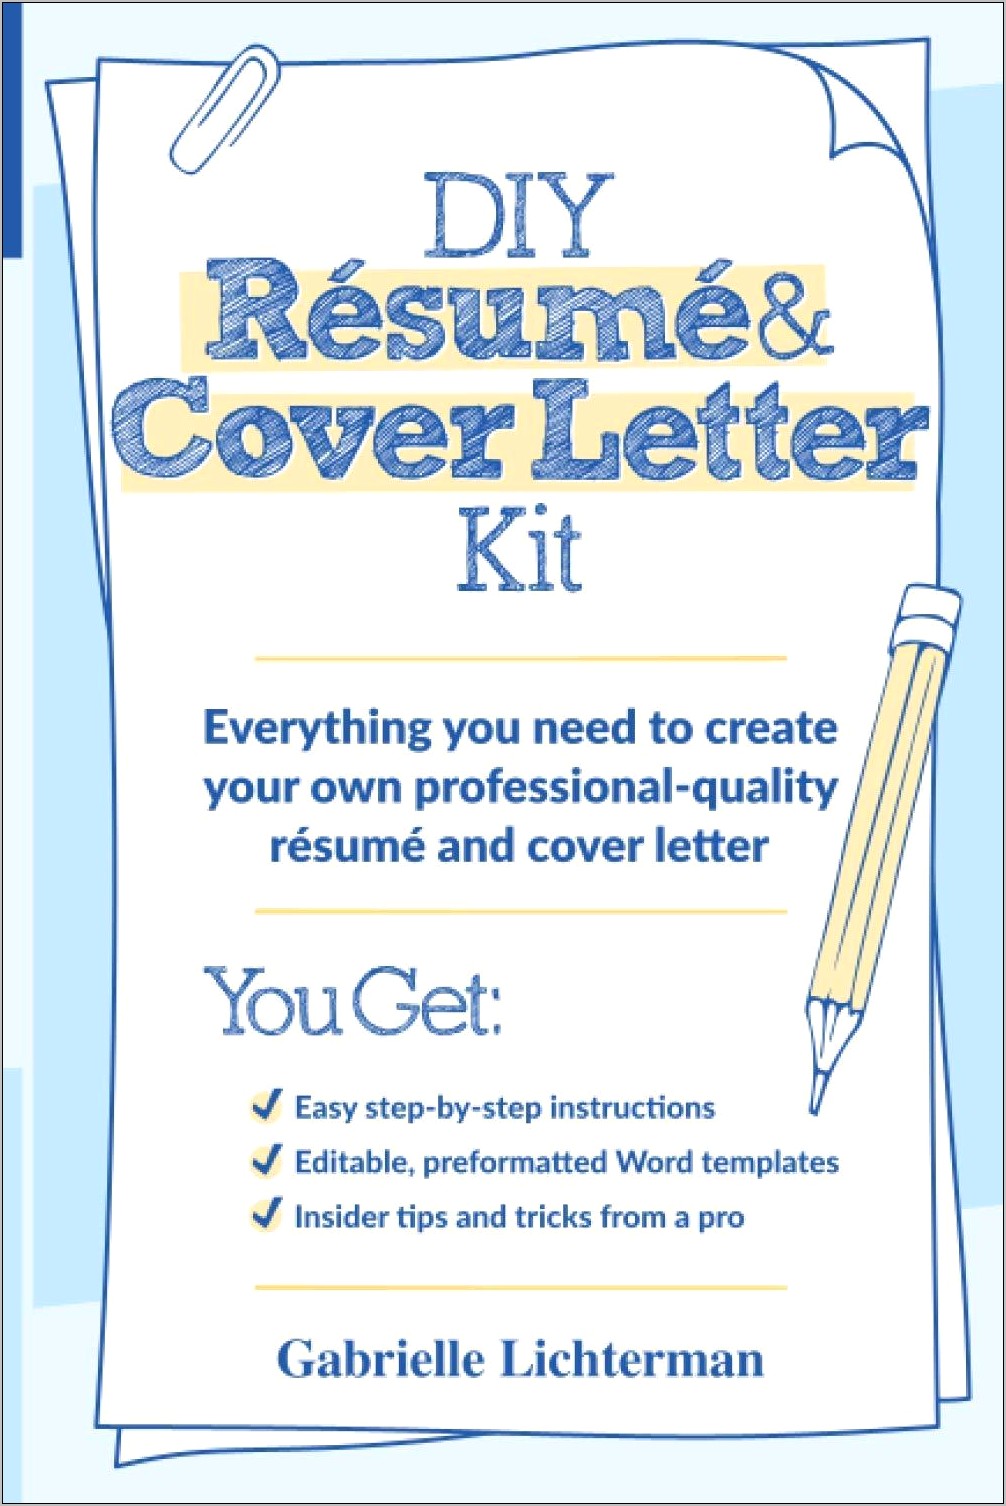 Preparing A Professional Resume And Cover Letter